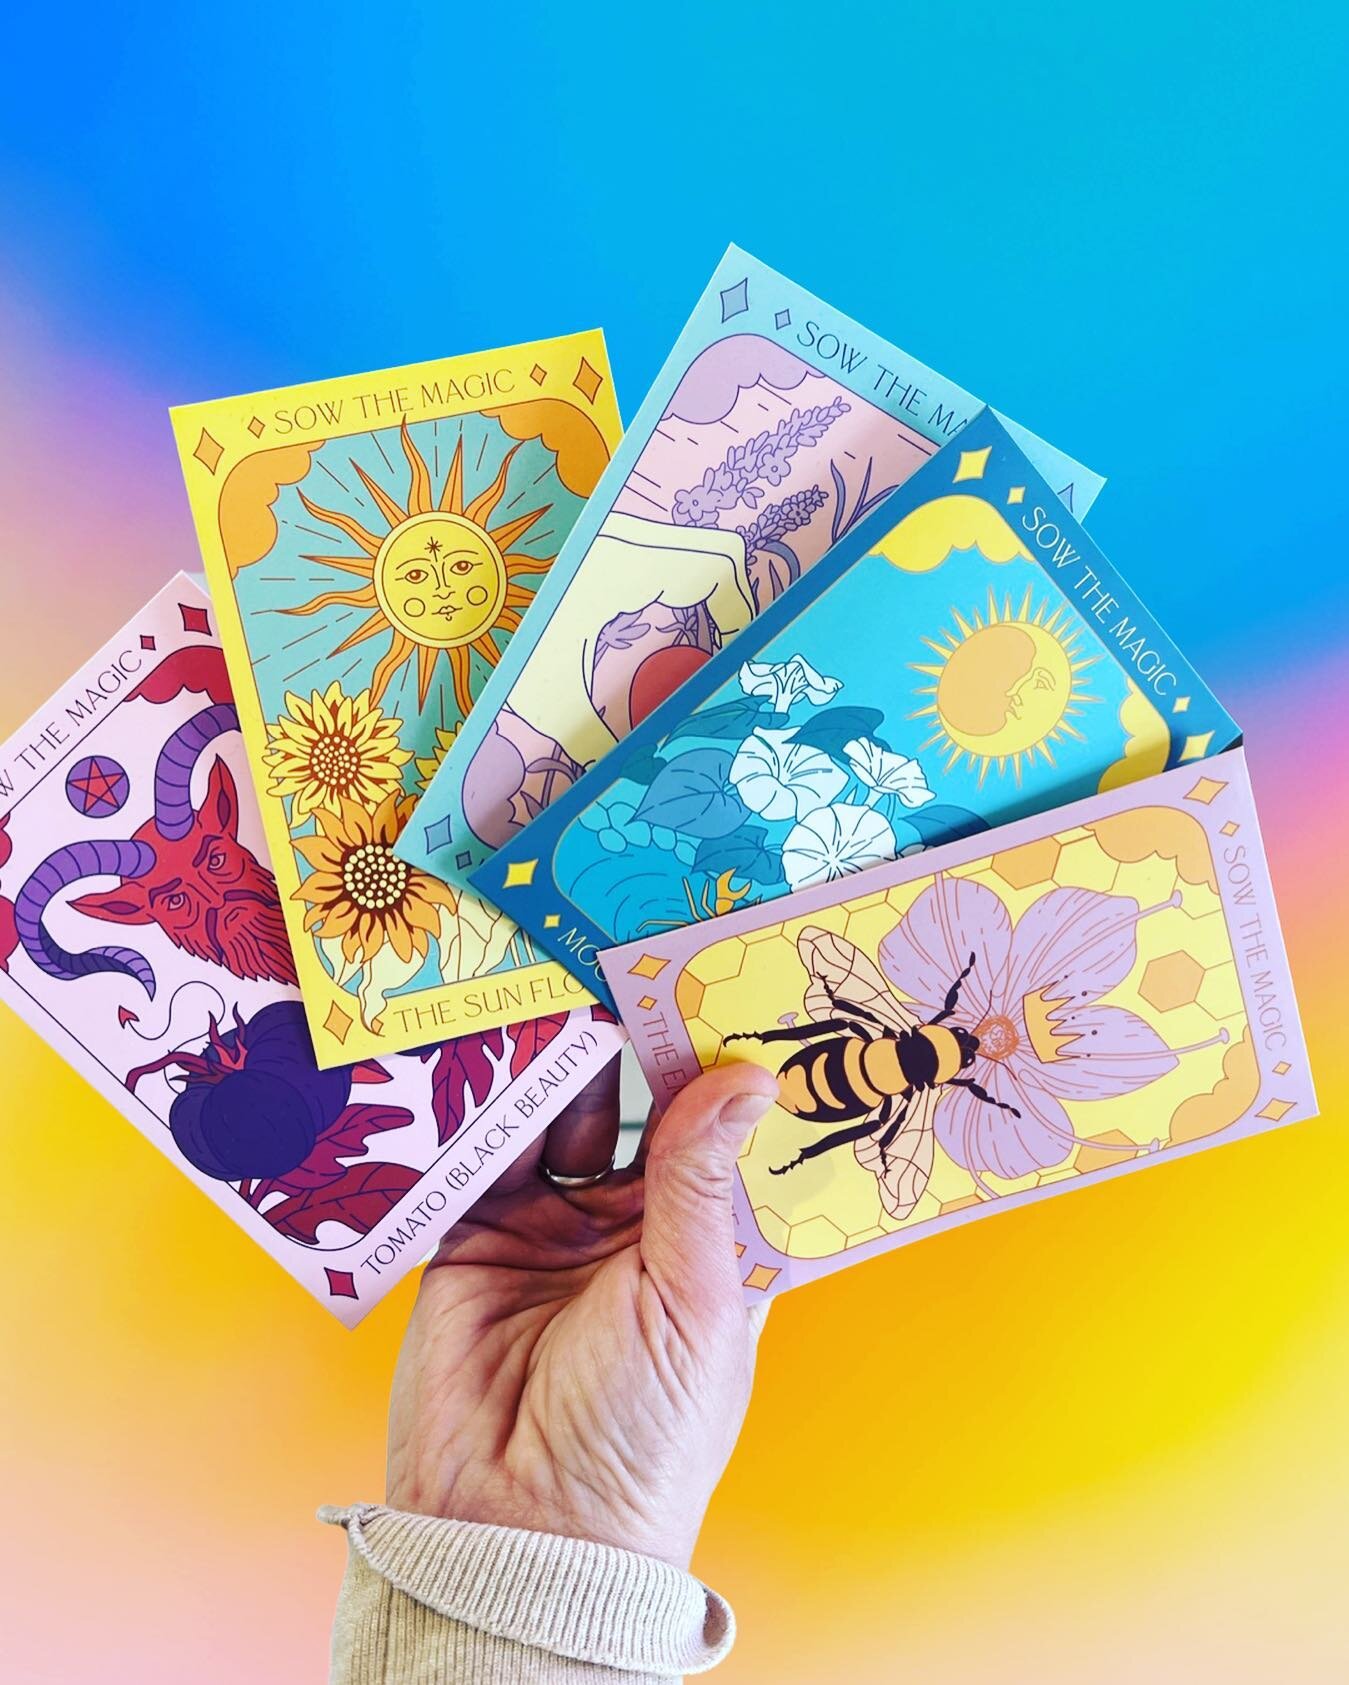 SPRING IS ON ITS WAY!! (And you know us at the Owl, we love us some plants!) 
Check out these cool Tarot Inspired seed packs from @sowthemagic that we have in stock&hellip; we are currently sprouting some these babies to put in our own garden and HIG